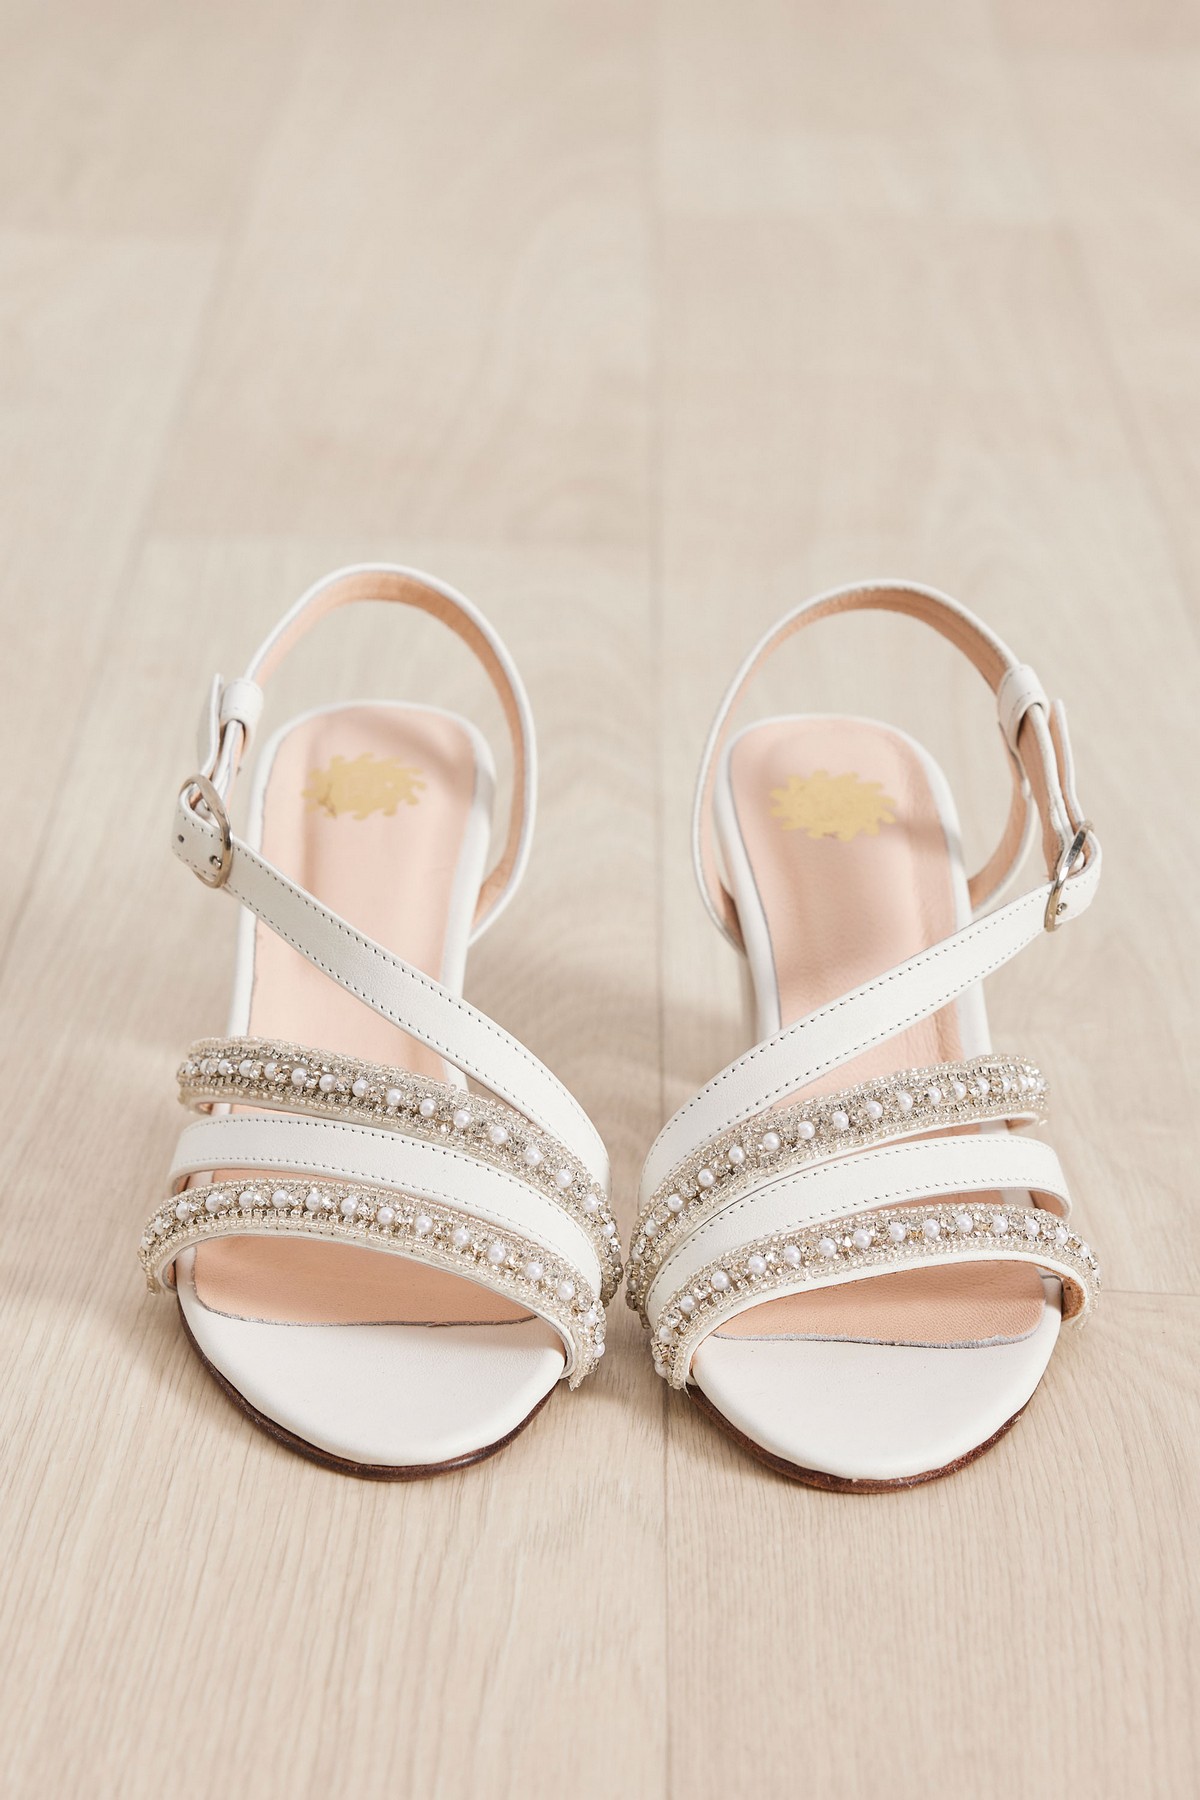 white leather sandals women